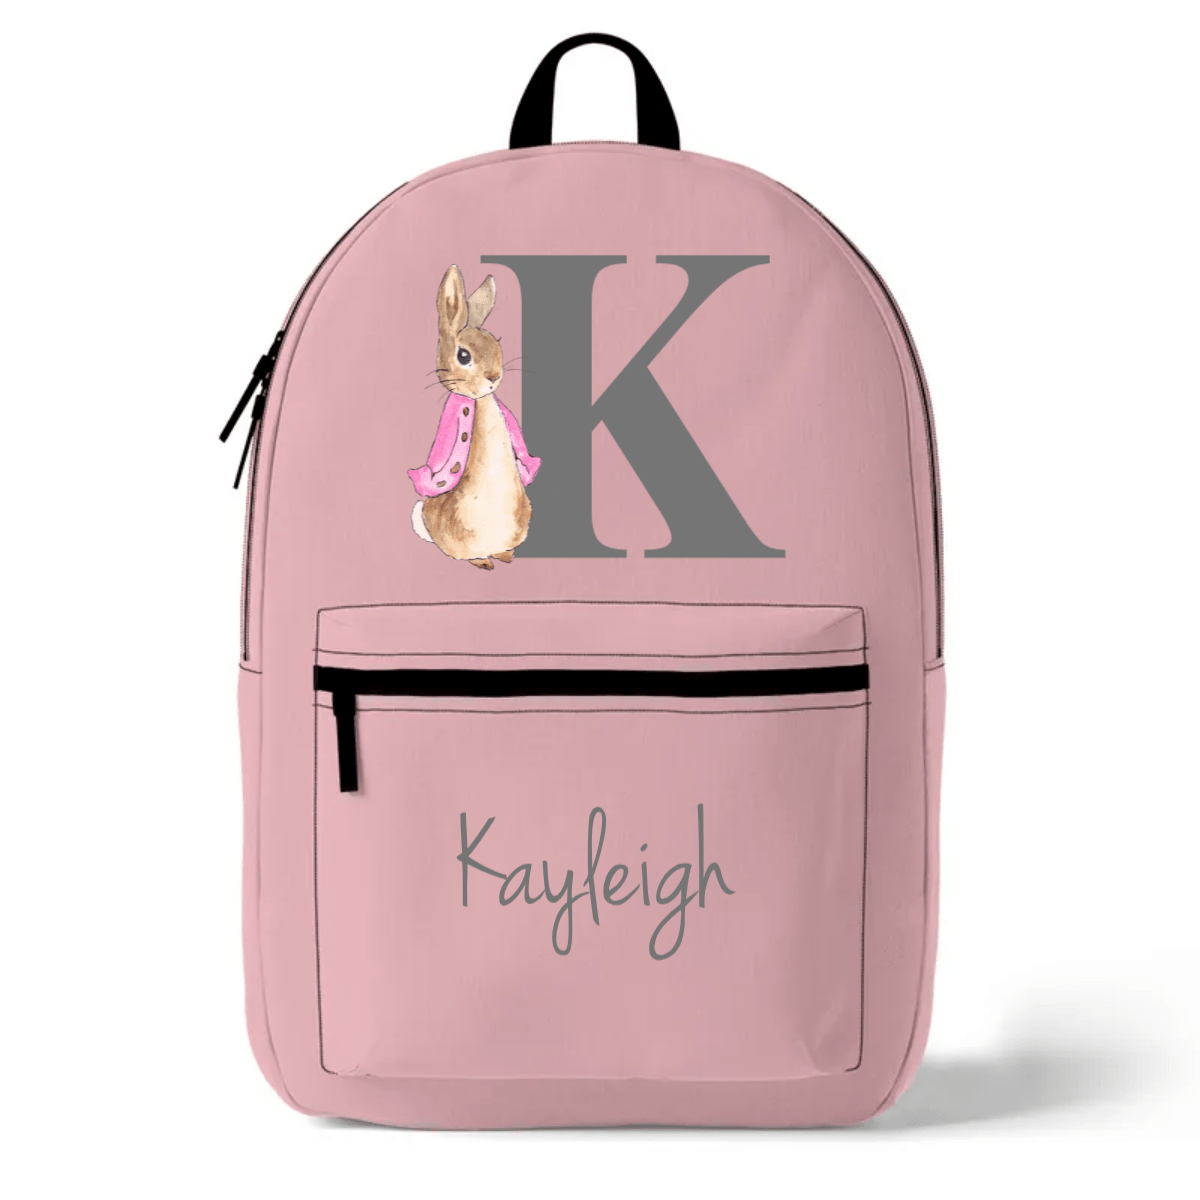 Personalized Backpack With Kid Name - Custom Gift For Back To School, First Day of School - Student, Son, Daughter | Kindergarten, Pre-K, Preschool